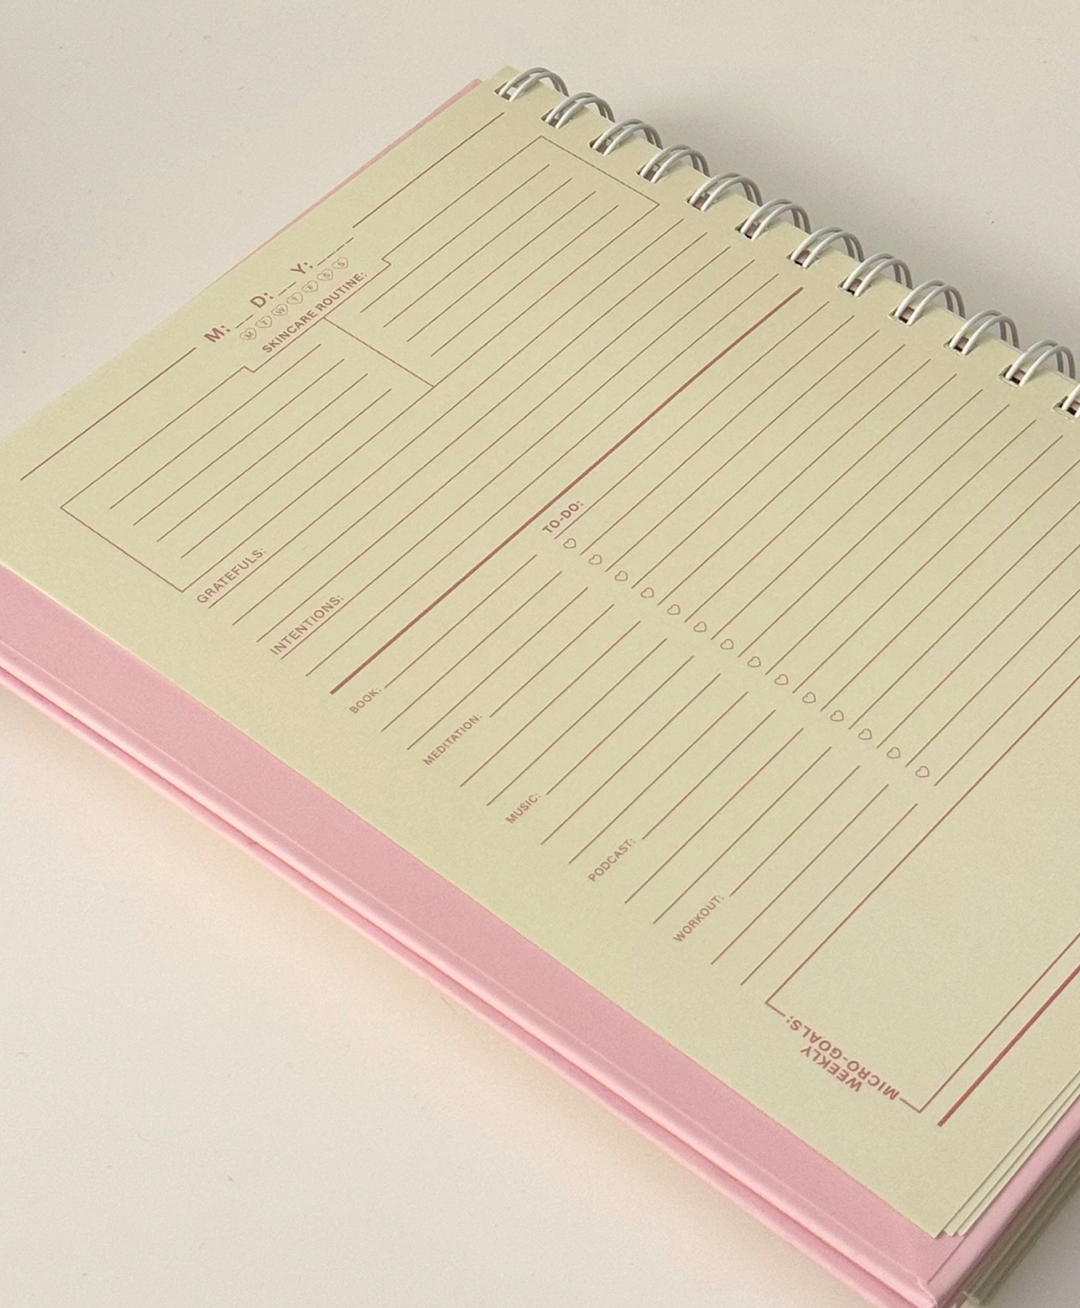 HOT MINUTE PLANNER